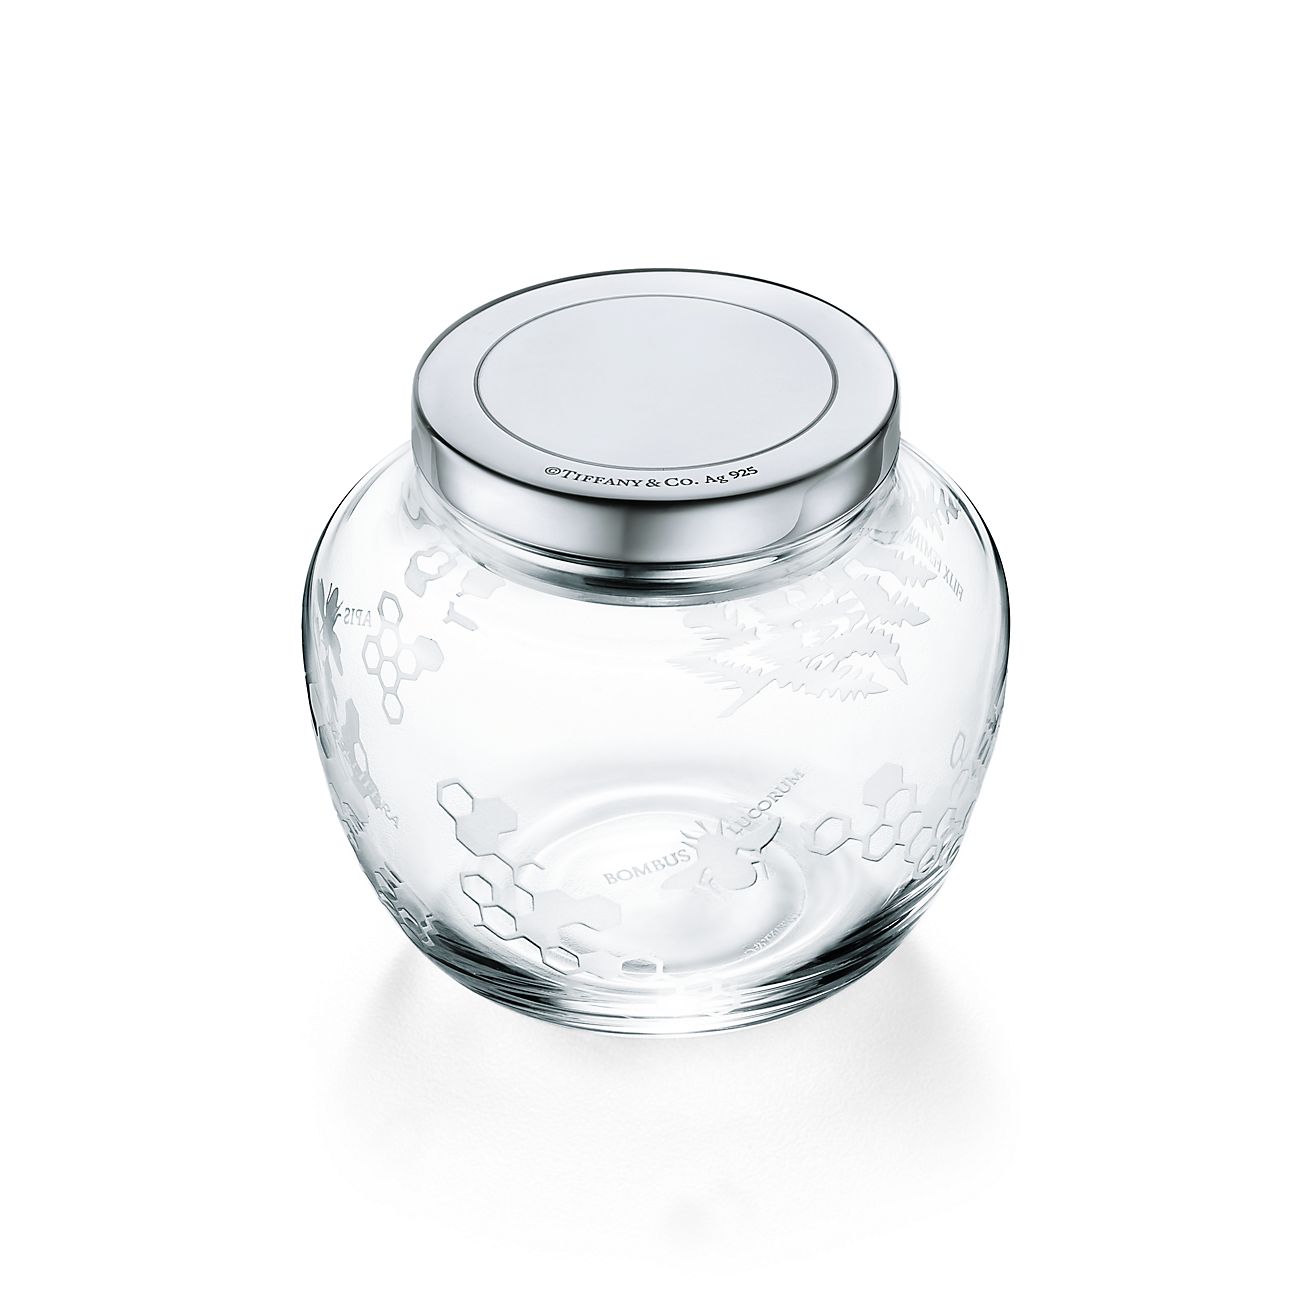 Flora & Fauna lidded pot in mouth-blown crystal glass with